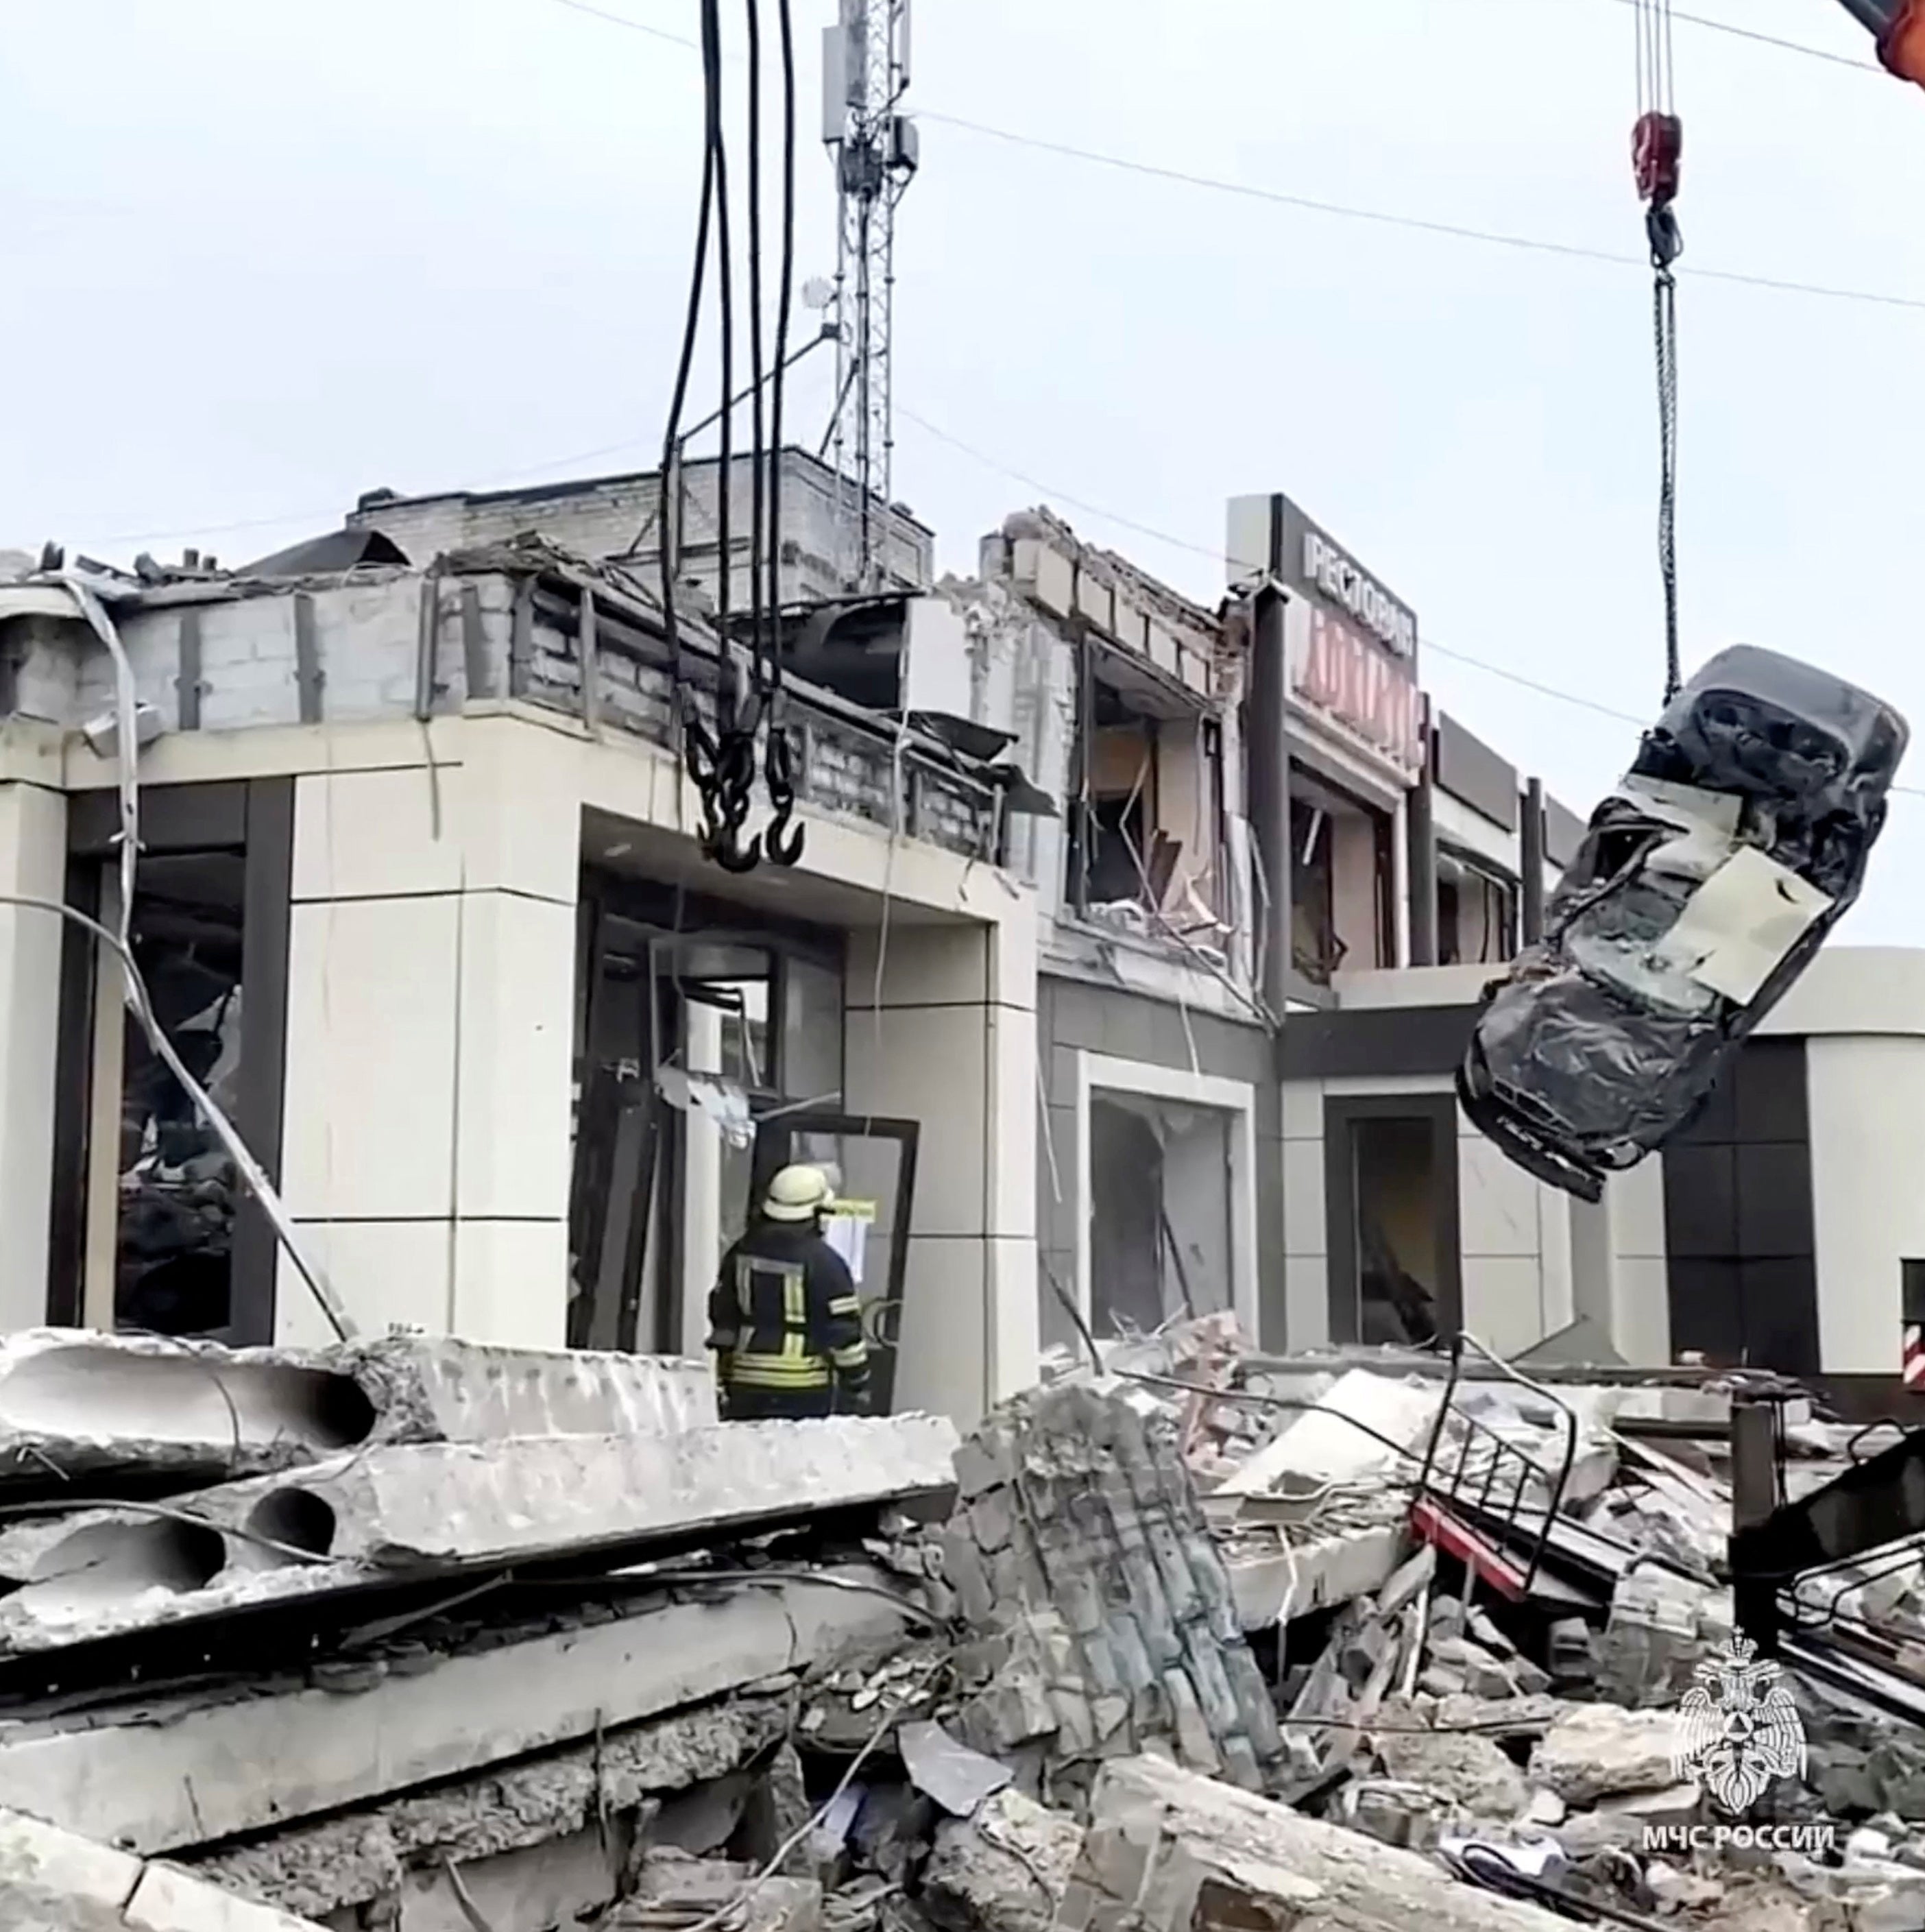 

<p>A crane lifts a destroyed vehicle from under the rubble as a damaged building is seen in the background, in Lysychansk</p>
<p>” height=”2818″ width=”2808″ layout=”responsive” i-amphtml-layout=”responsive”><i-amphtml-sizer slot=